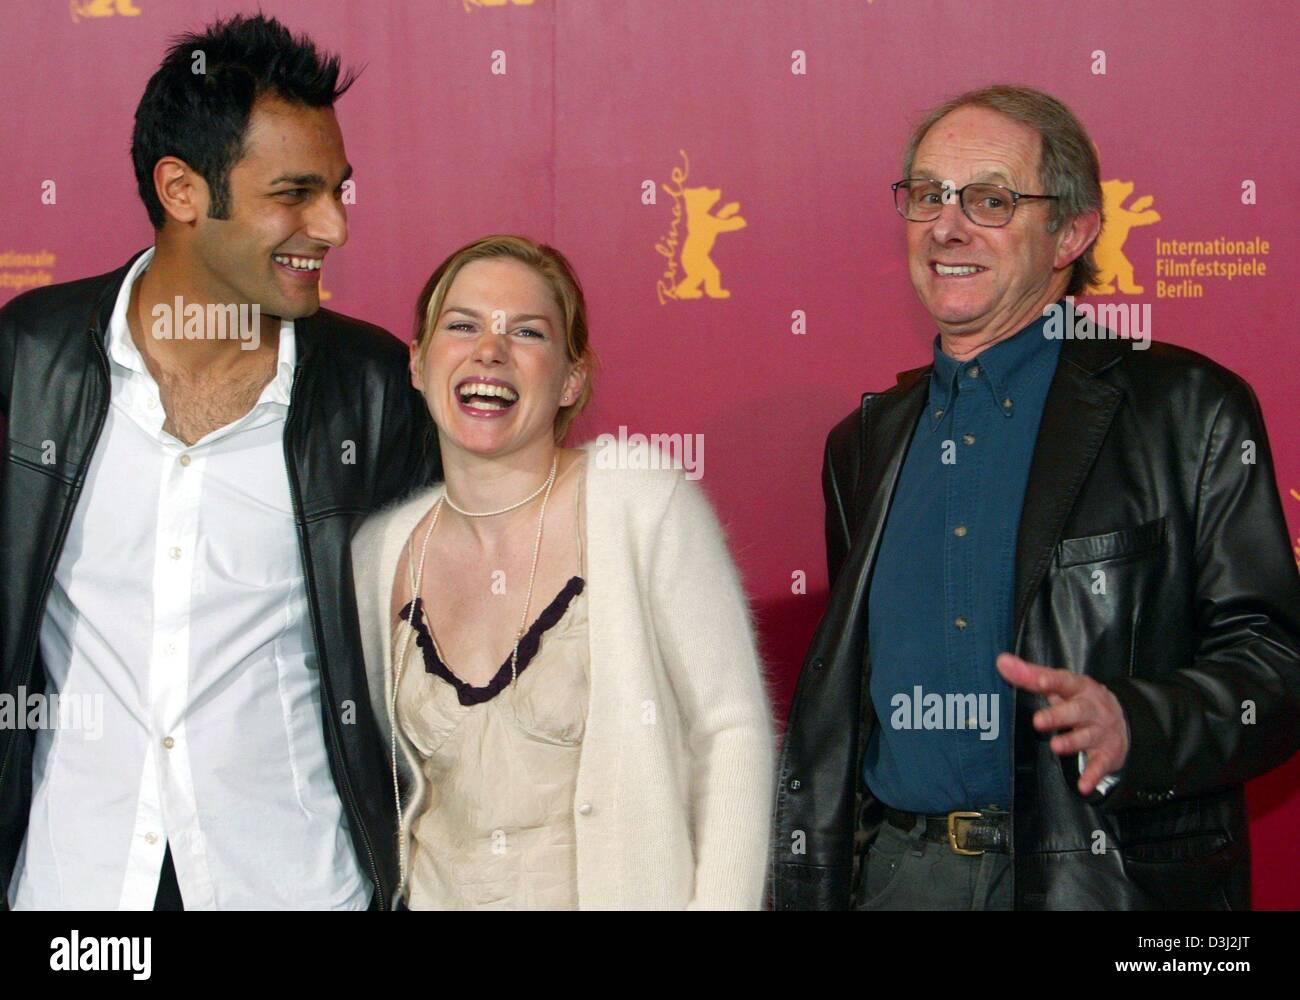 (dpa) - British actors Eva Birthistle and Atta Yaqub and british filmmaker ken Loach stand next to each other and smile as they attend a press conference during the 54th Berlinale International Film Festival in Berlin, 13 February 2004. Birthistle, Yaqub and Loach presented their new film 'A Fond Kiss'. The film tells the love story between a young Catholic woman from Glasgow and t Stock Photo